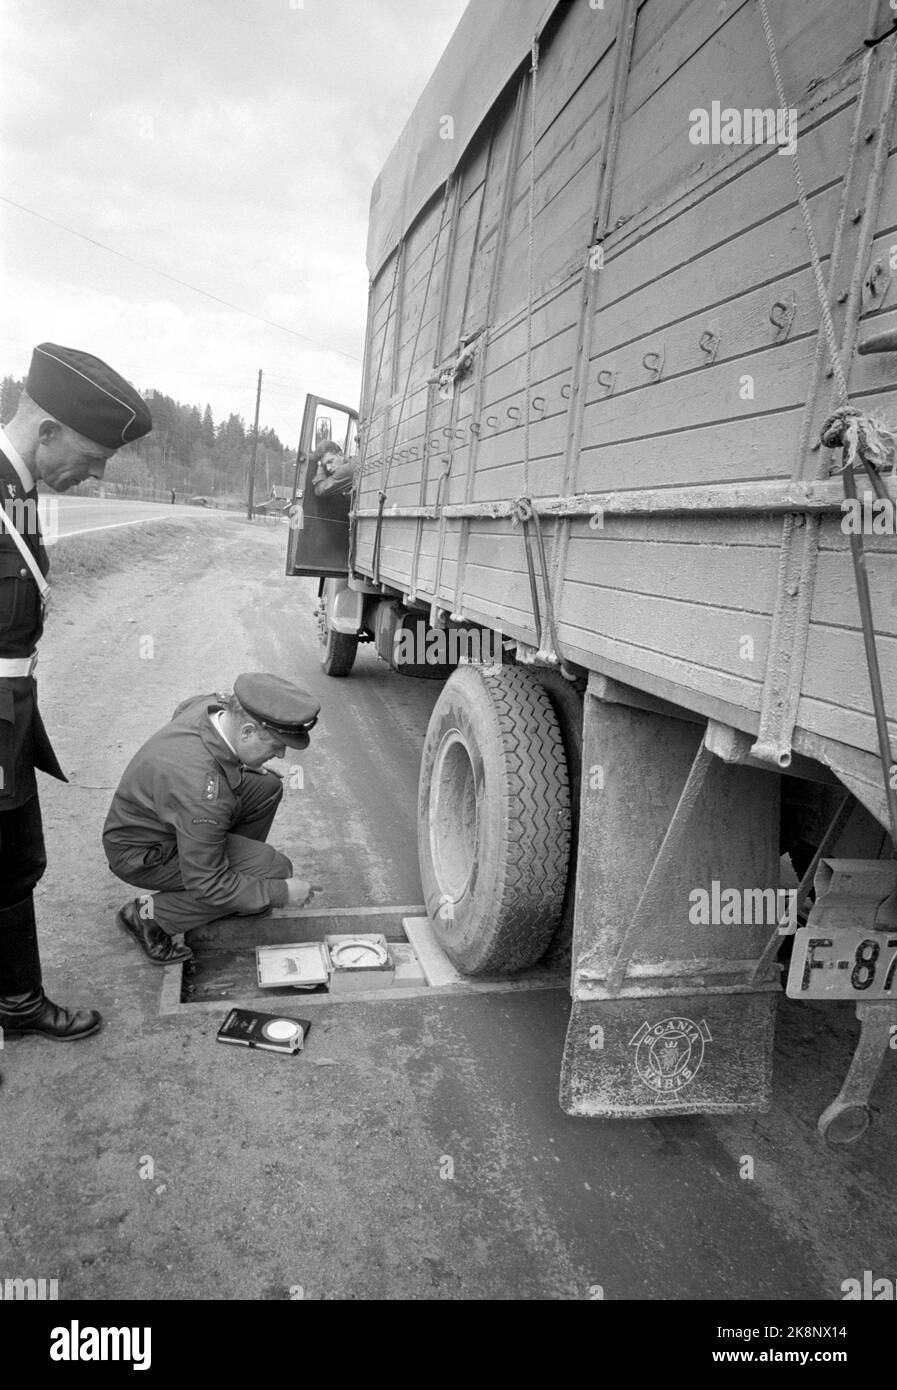 1969-05-12 'Police are trying new roads'. Makan to master the accelerator has never been registered on the roads in Vestfold. But then also the police's large-scale control, called Operation Sample County, was thoroughly in advance in both the local and capital press. A huge trailer rolls over the weight, and Ansgar Løkke reads the number of tonnes while Toralt Winterkjær from the emergency police follows the background. Most trailers balance on the limit of being overweight. Photo: Aage Storløkken / Current / NTB Stock Photo